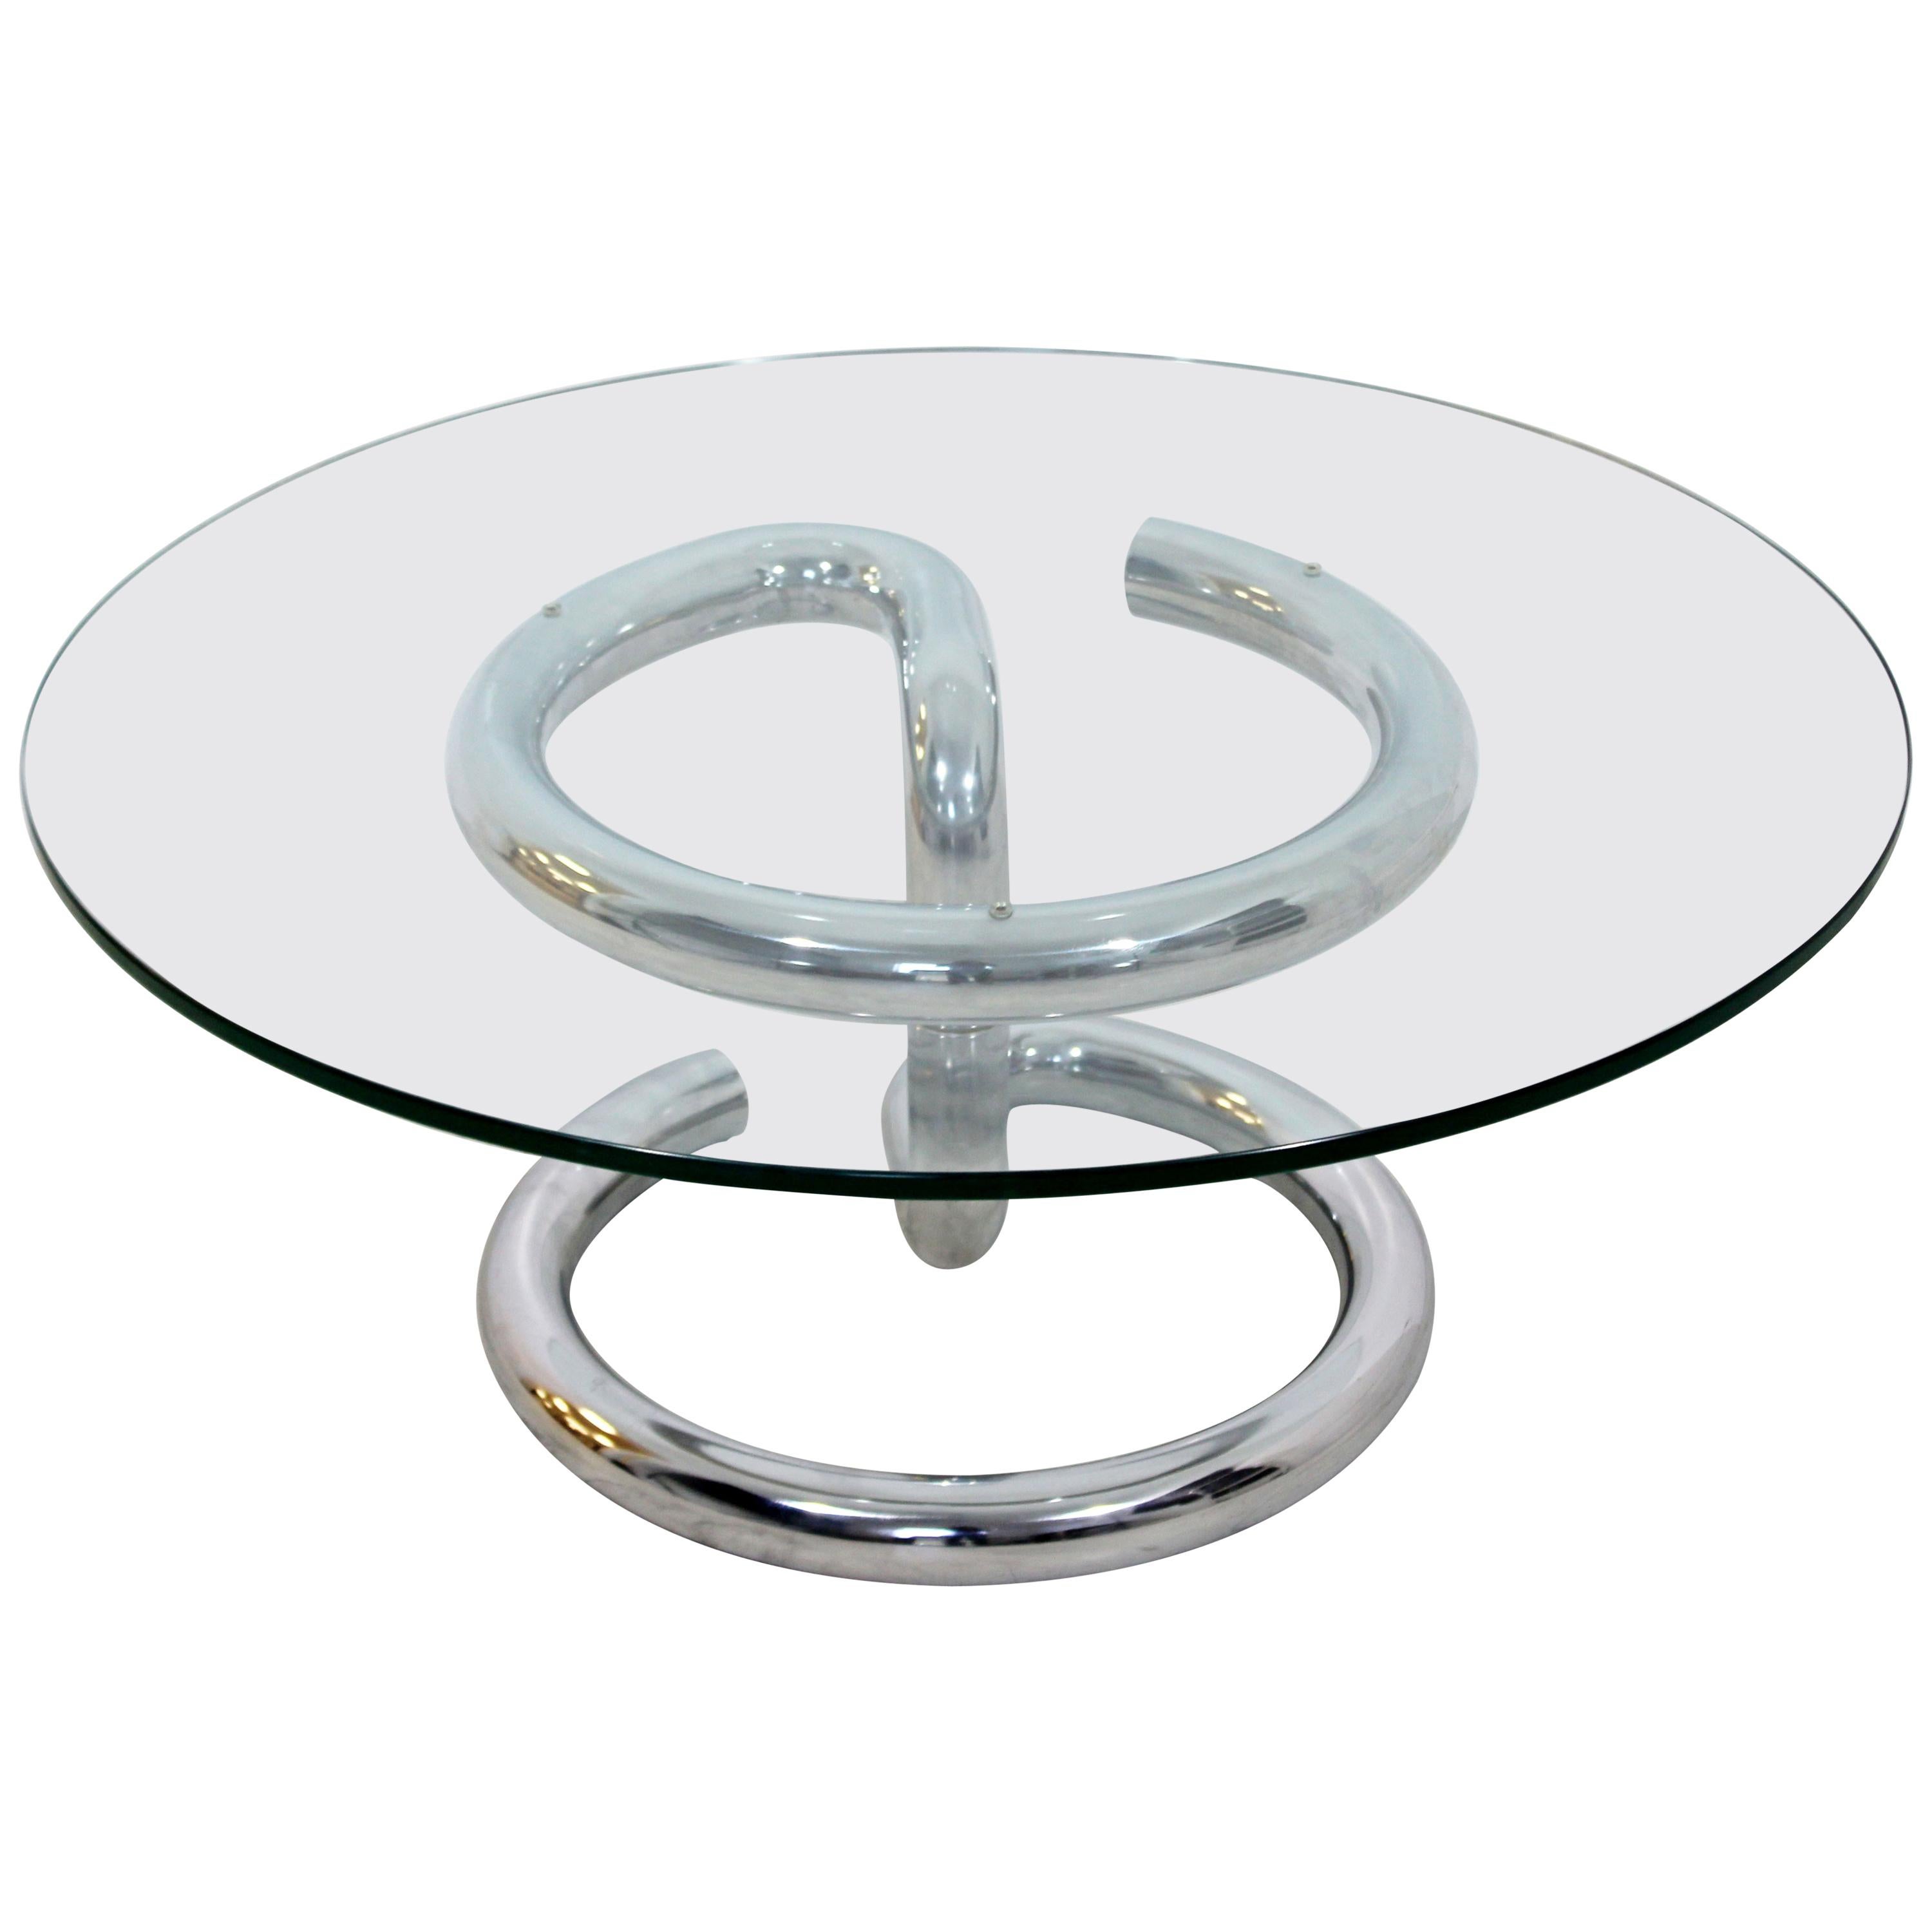 Mid-Century Modern Anaconda Chrome and Glass Coffee Table by Paul Tuttle, 1970s